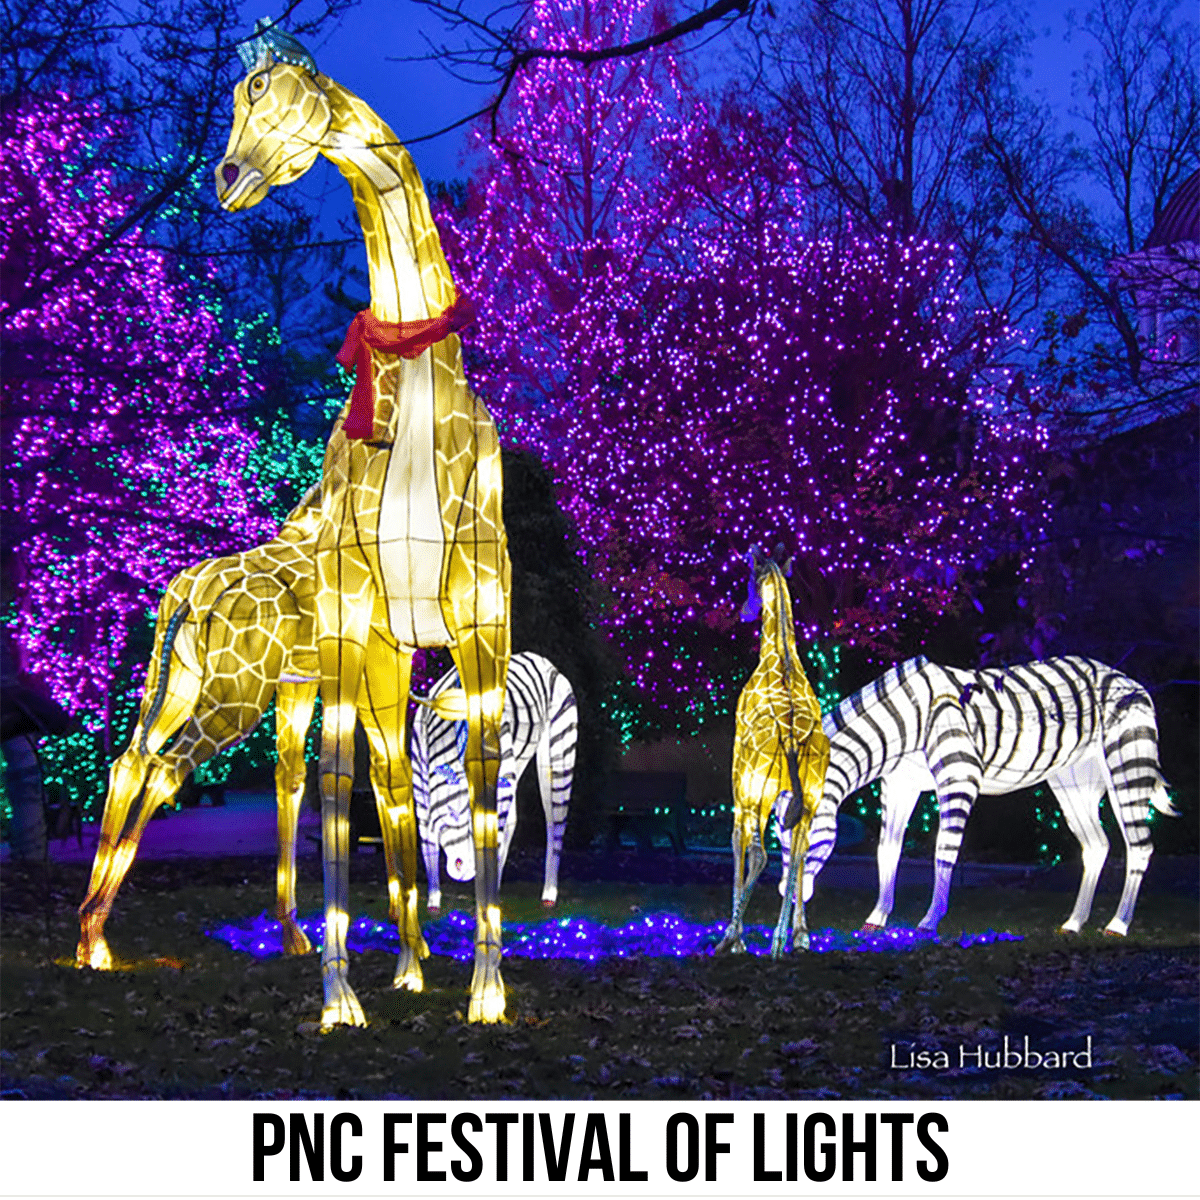 square image with a photo of a light display at Cincinncati Zoo, with giraffes and zebras. A white strip across the bottom has the text PNC Festival of Lights